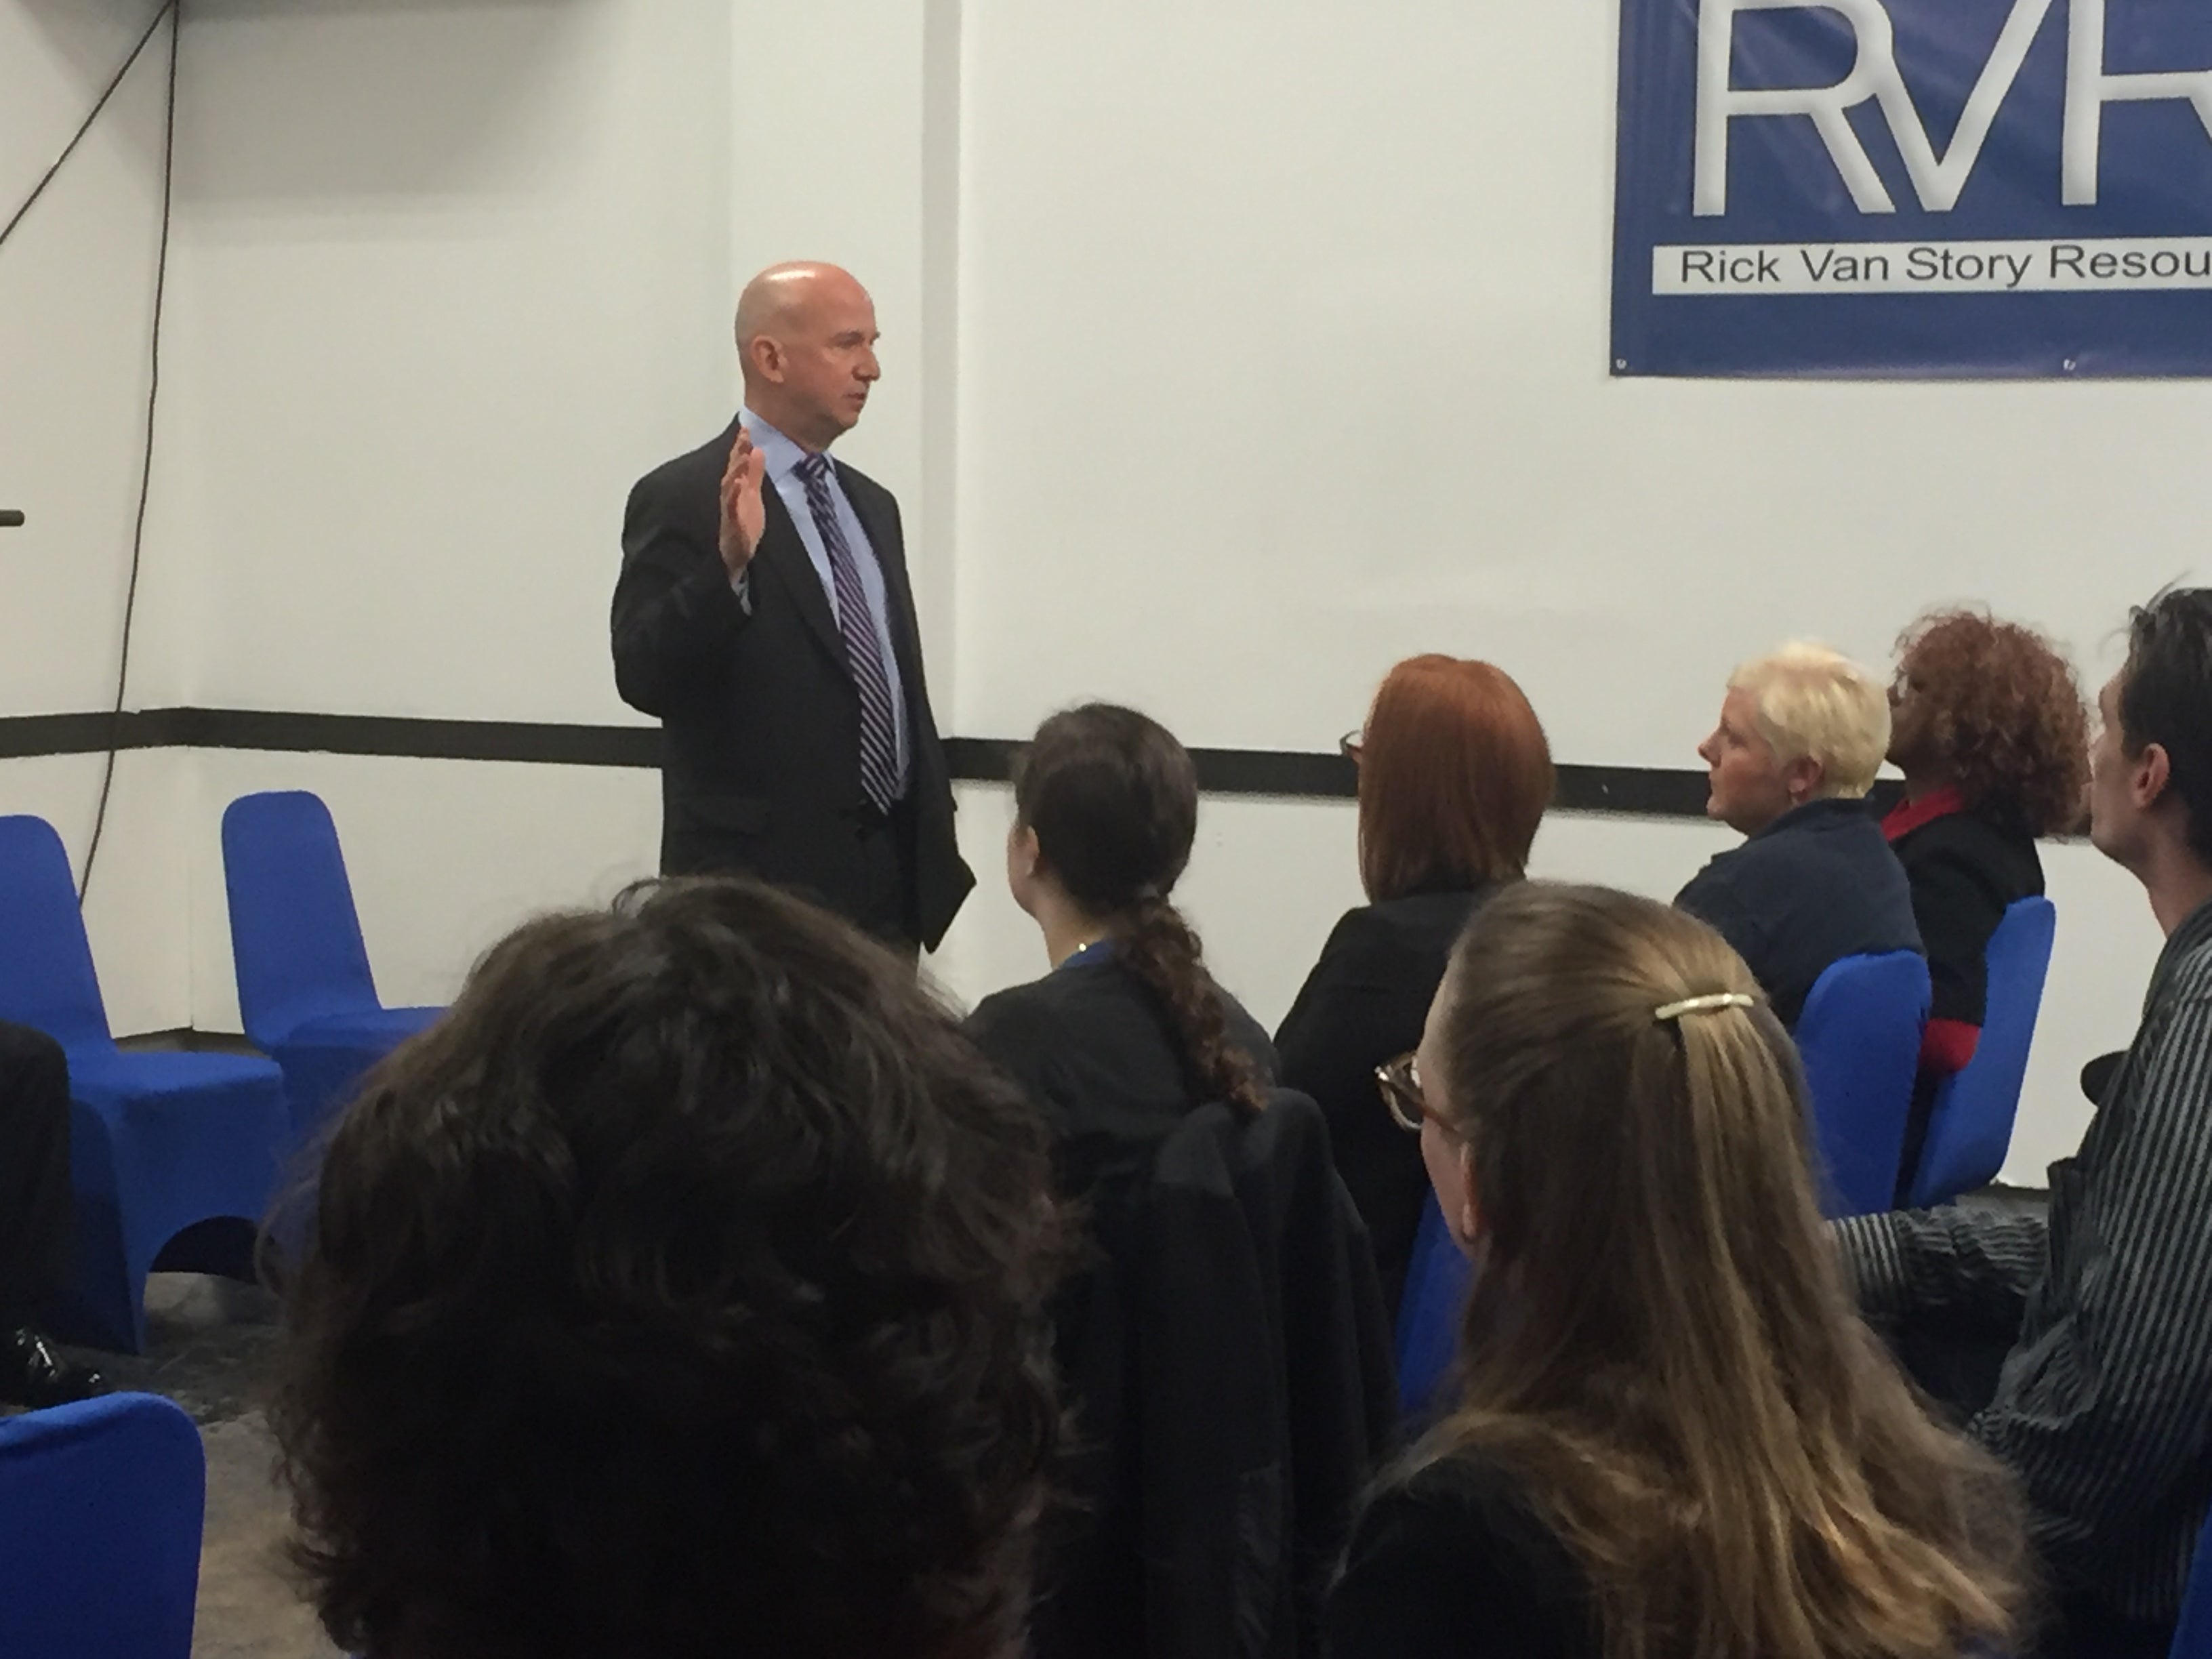  Gov. Markell talks at Wilmington's Rick VanStory Resource Center about the state's efforts to improve outcomes for defendants during the pre-trial period. (Zoe Read/WHYY) 